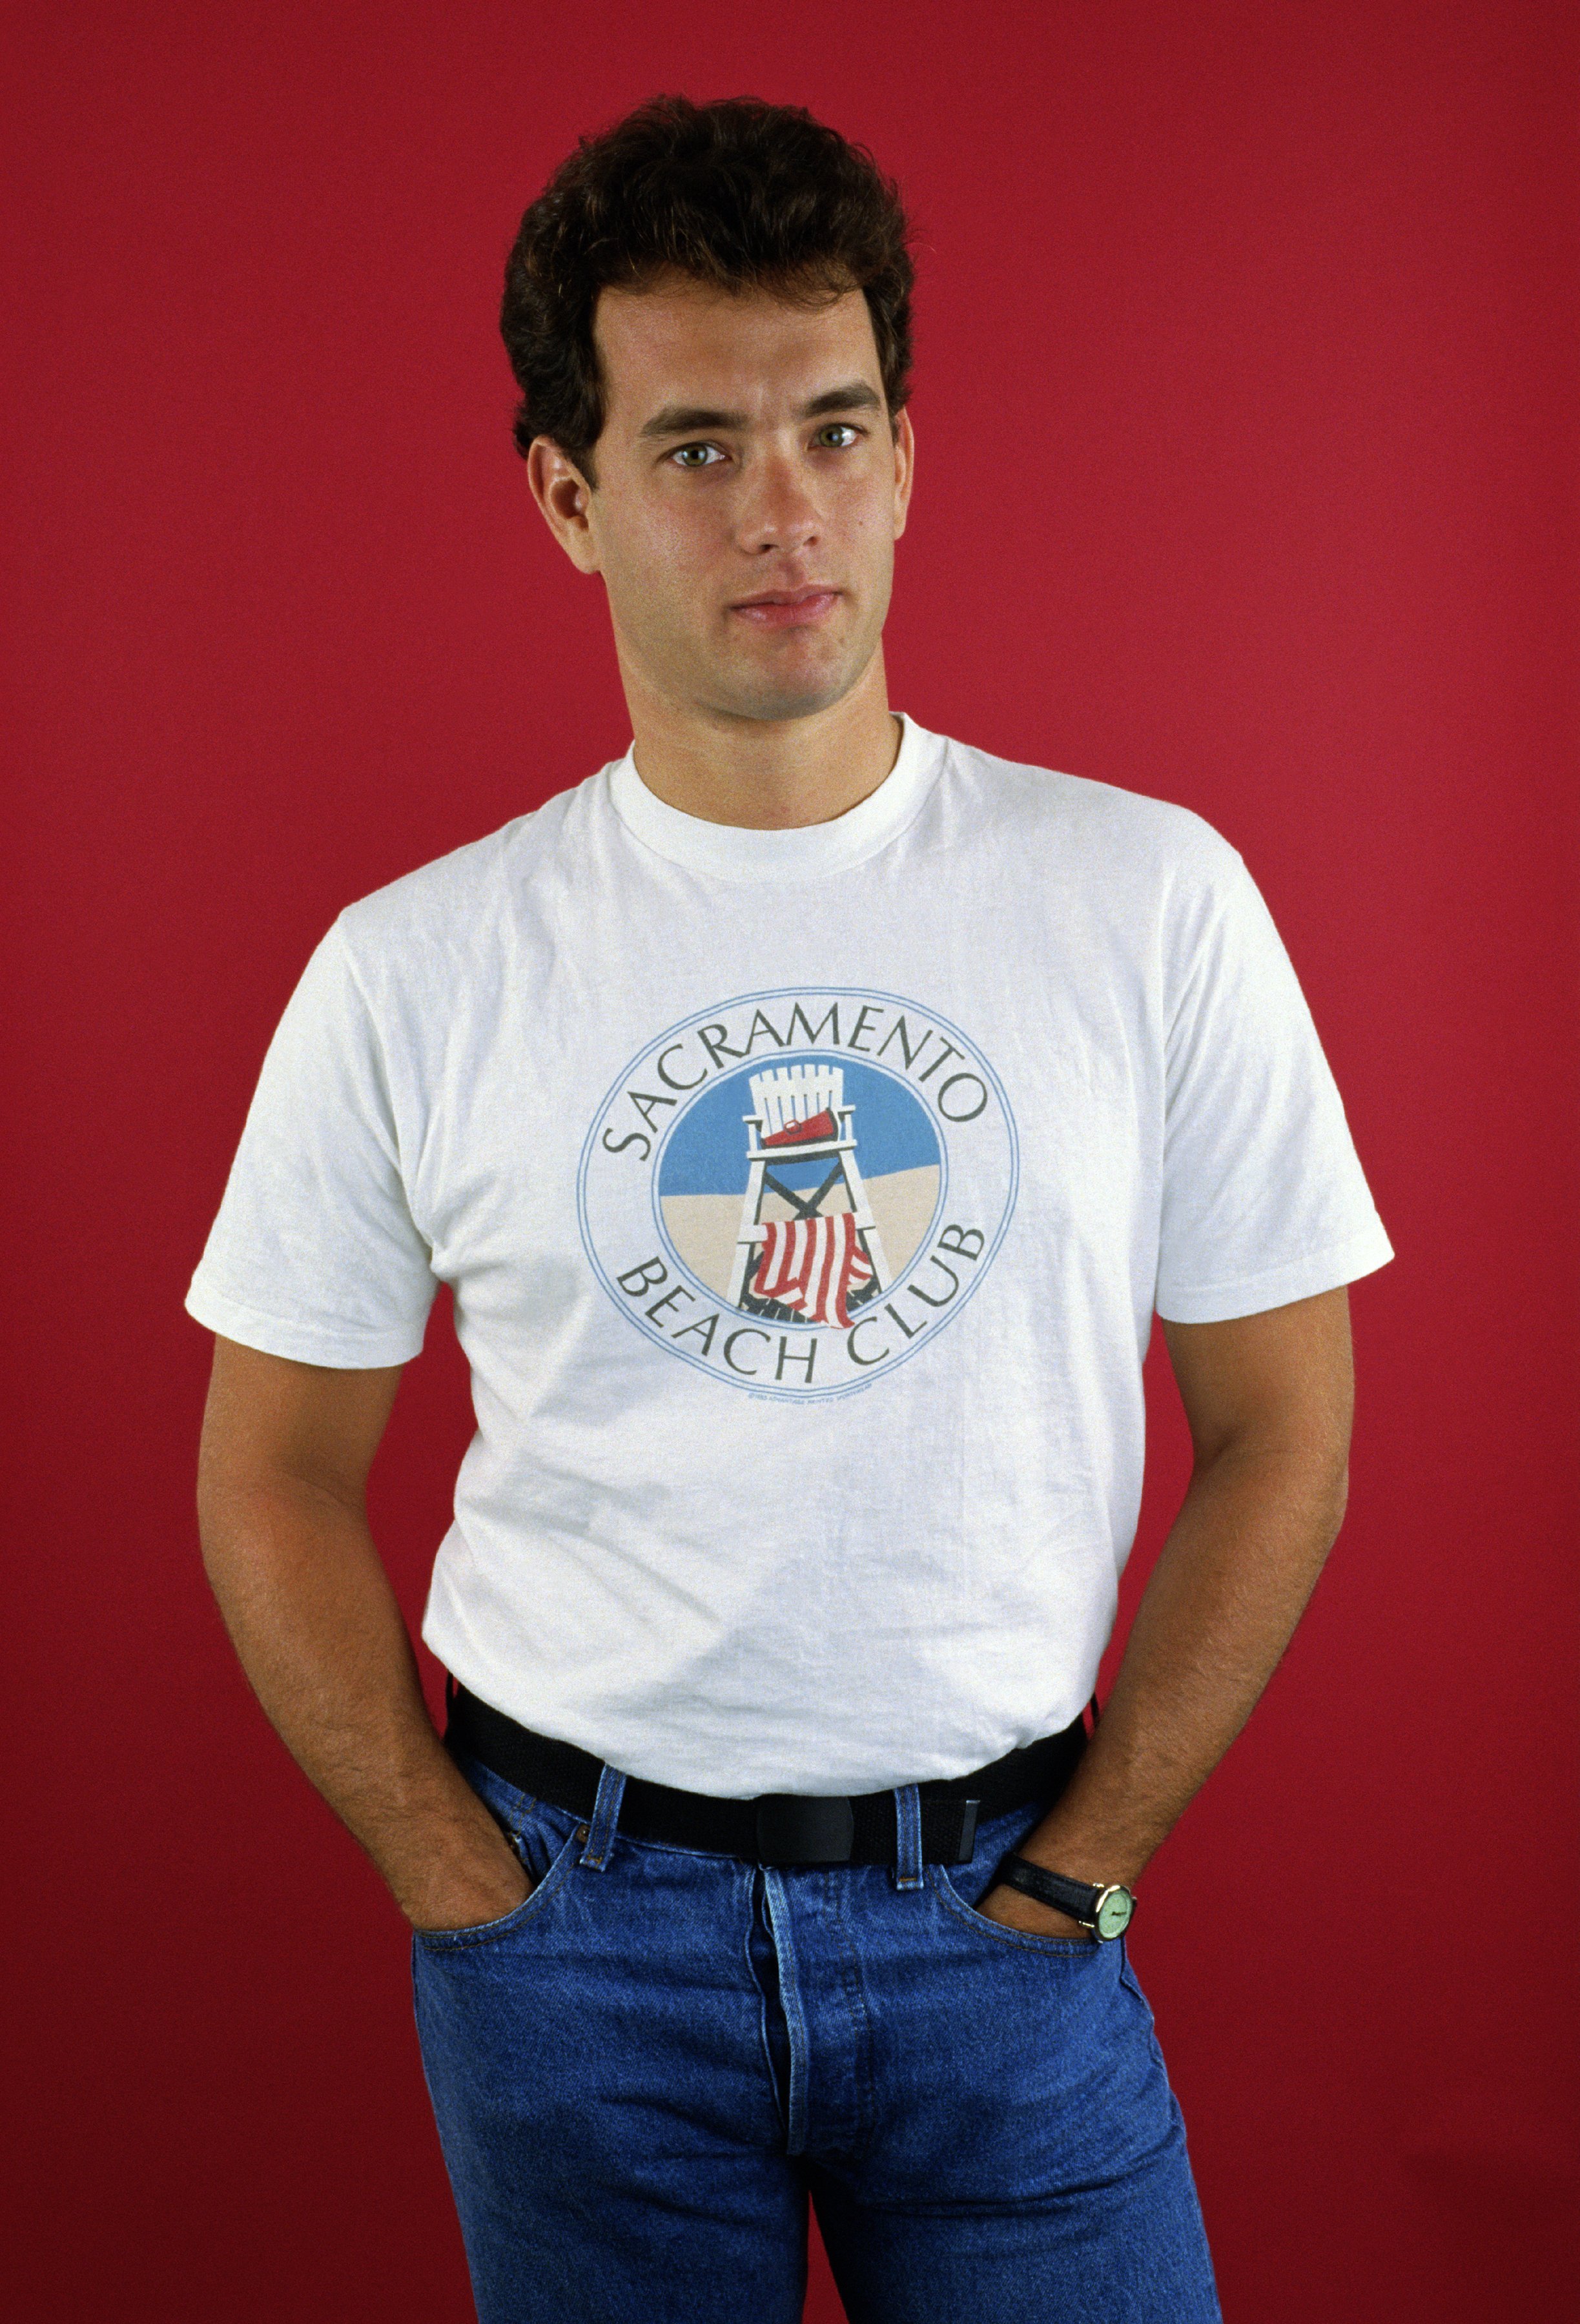 Tom Hanks poses during a 1986 West Hollywood, California studio portrait session to promote his newest movie "The Money Pit." | Source: Getty Images.